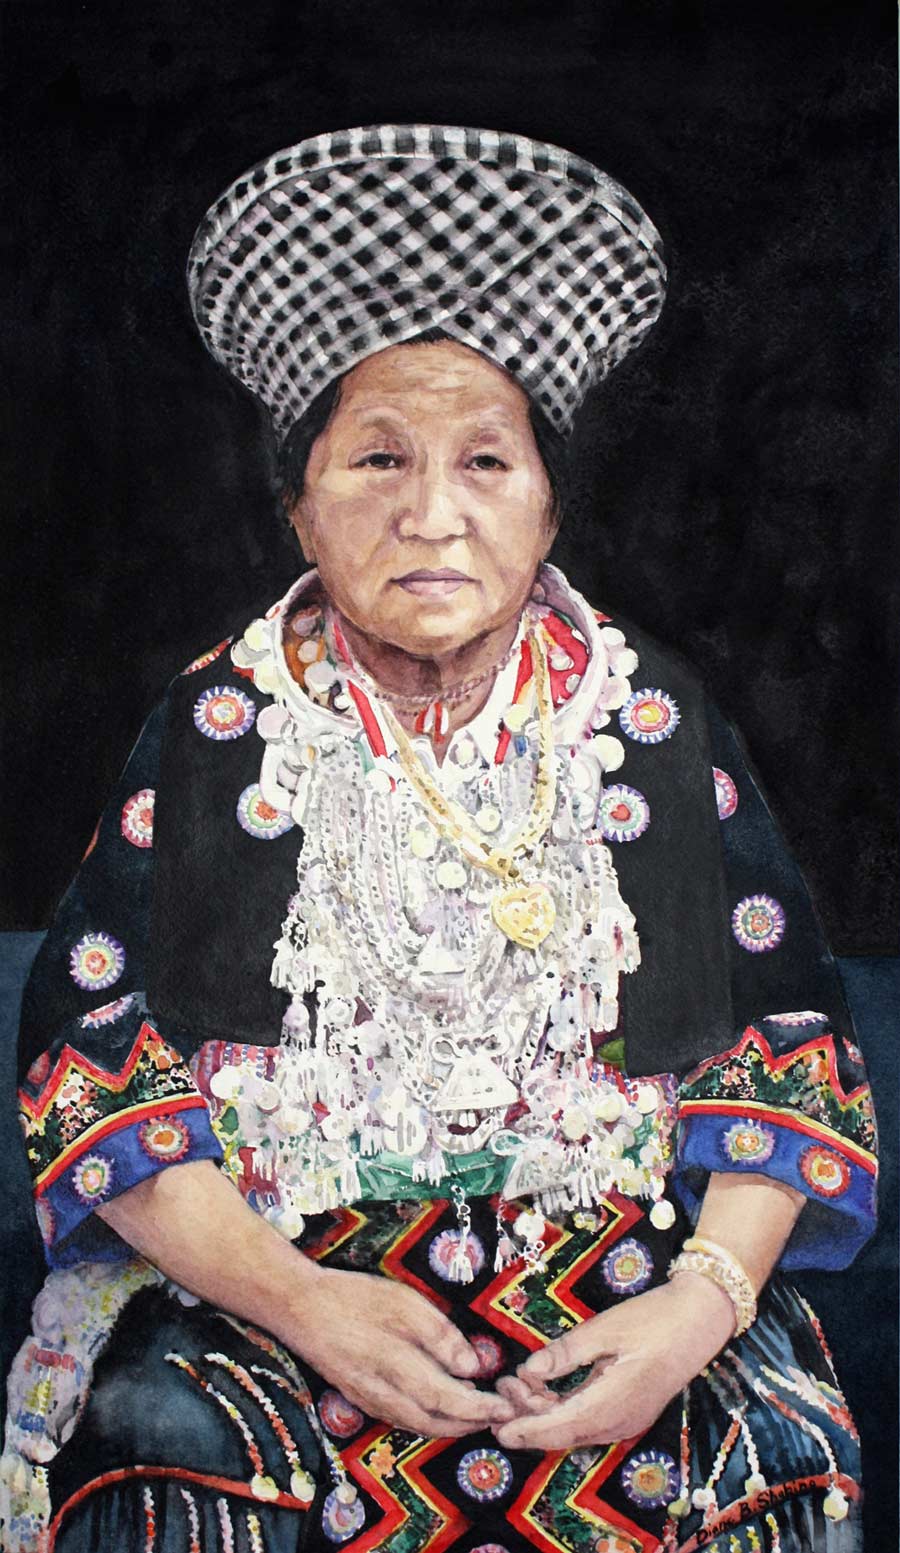 Hmong New Year, Transparent Watercolor, 20x12", by Diane B. Shabino